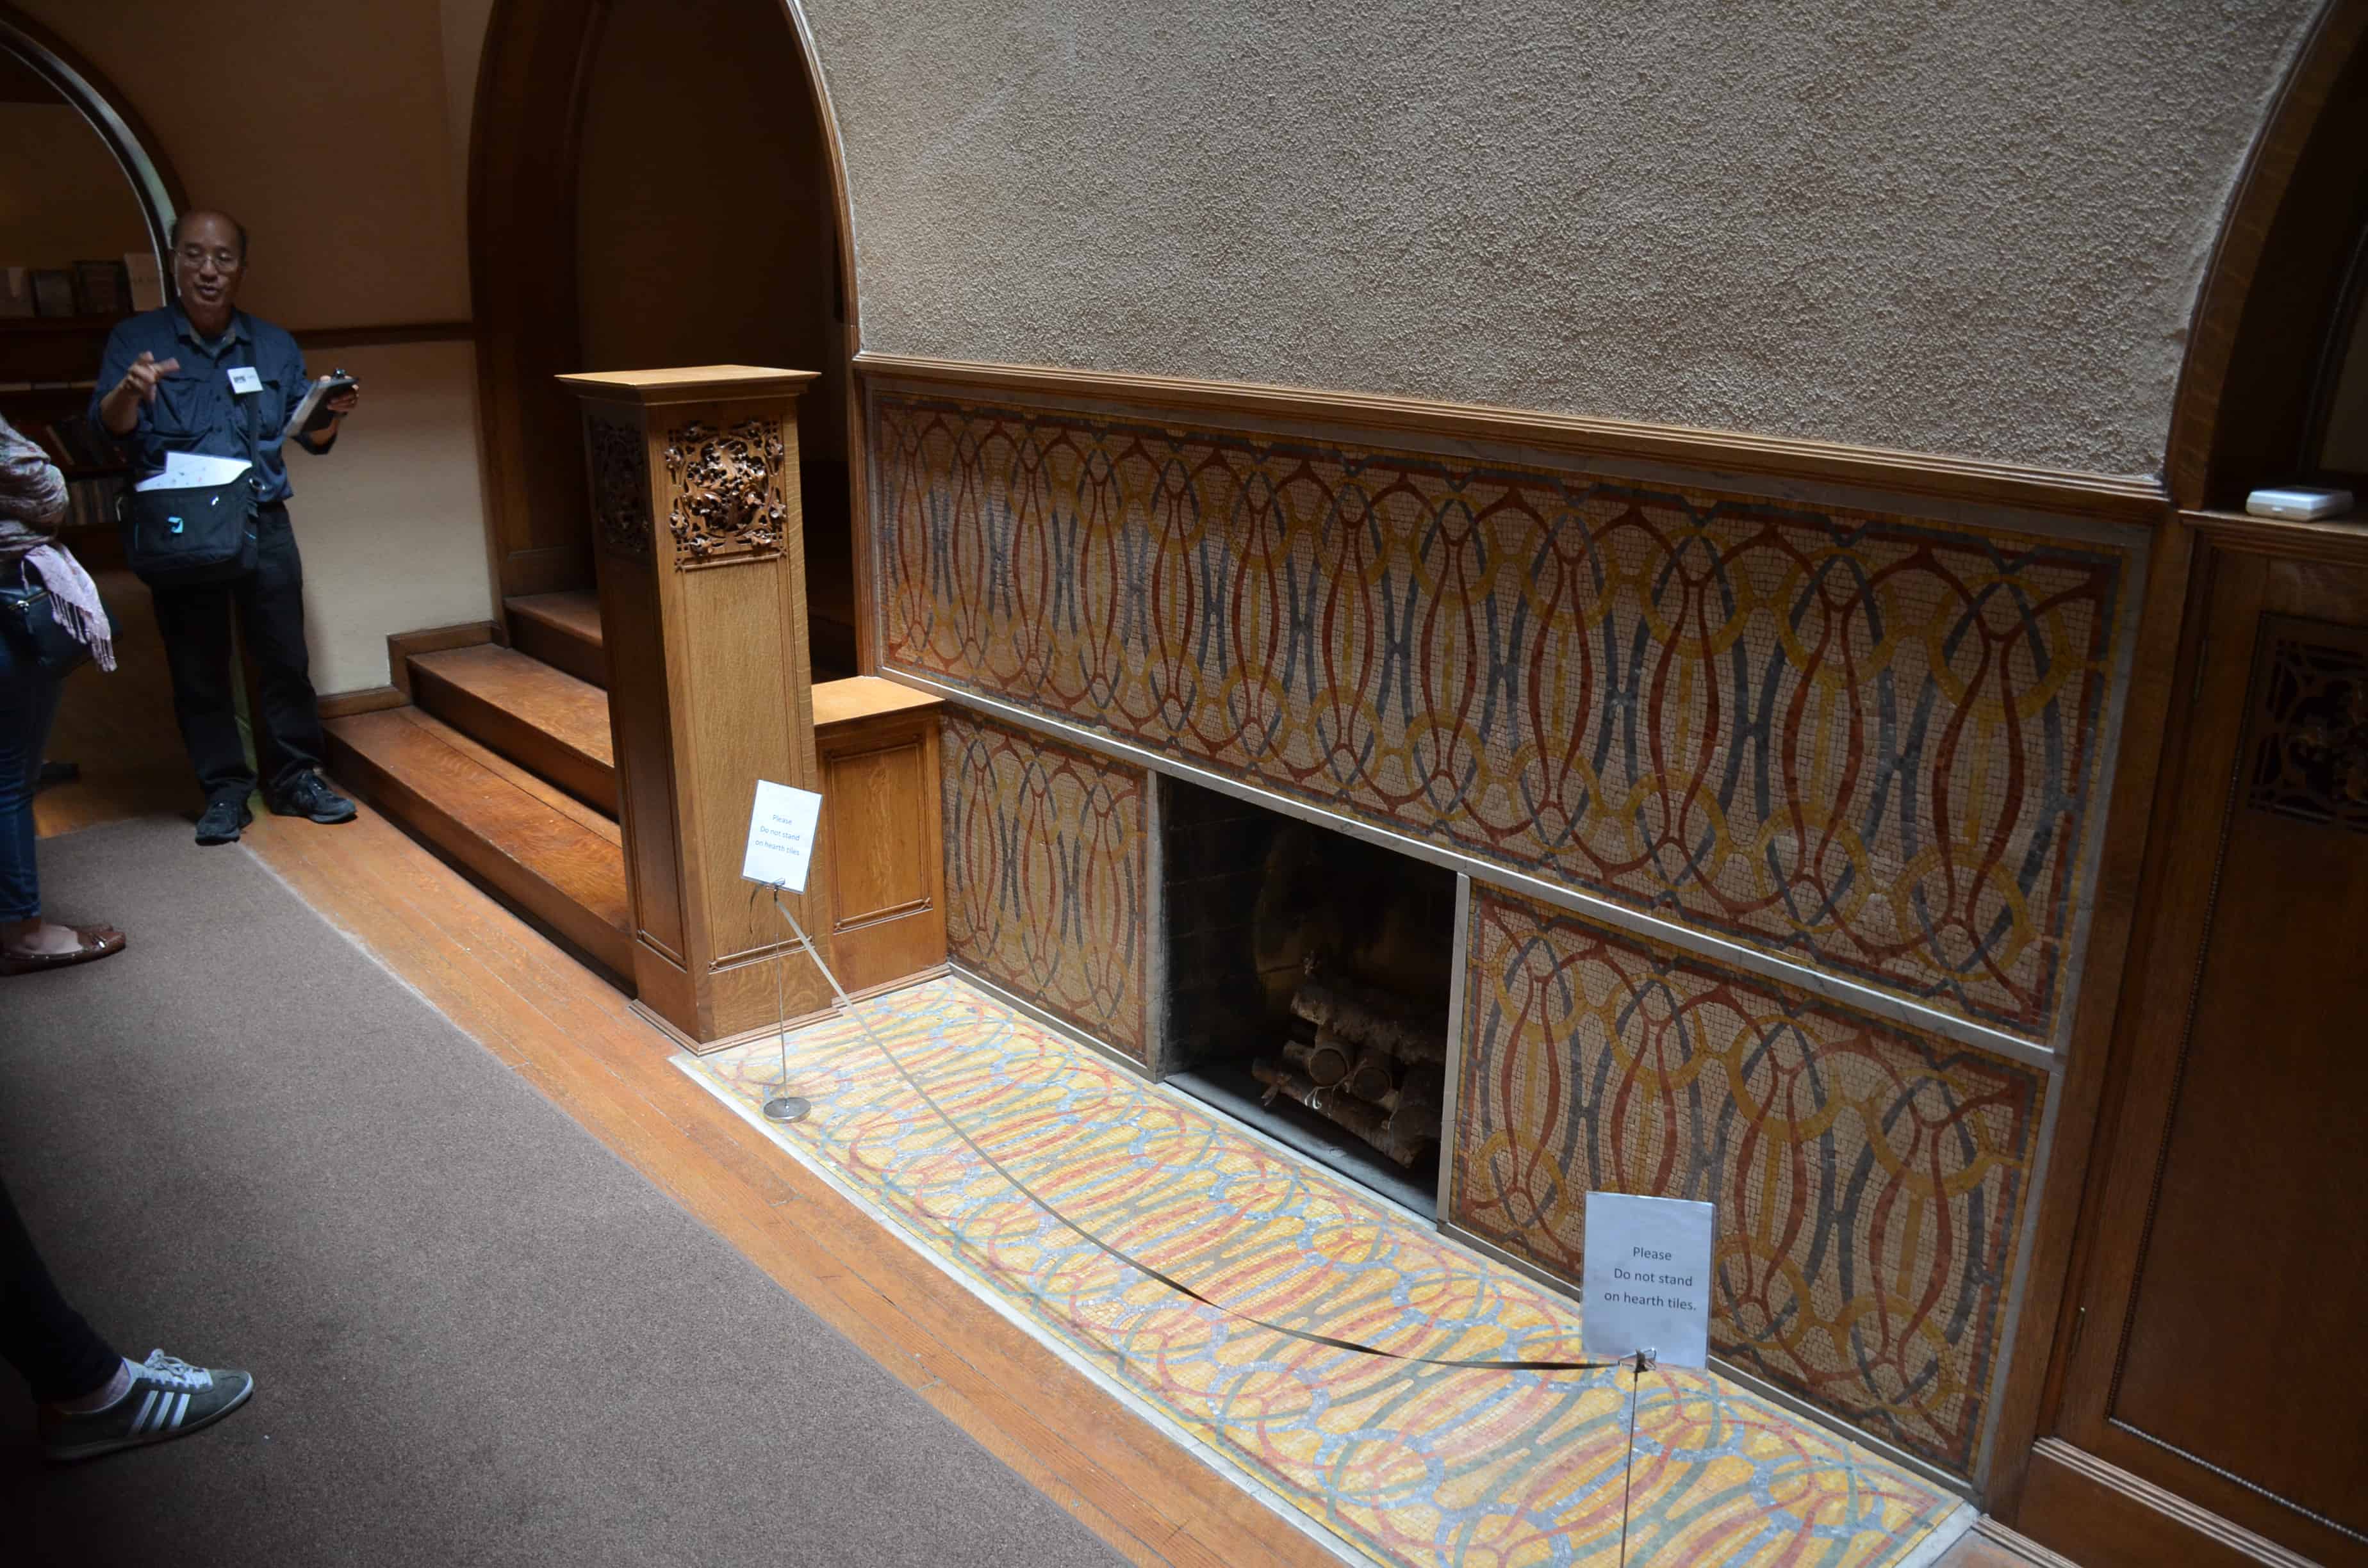 Fireplace at the front door of the Charnley-Persky House in Chicago, Illinois